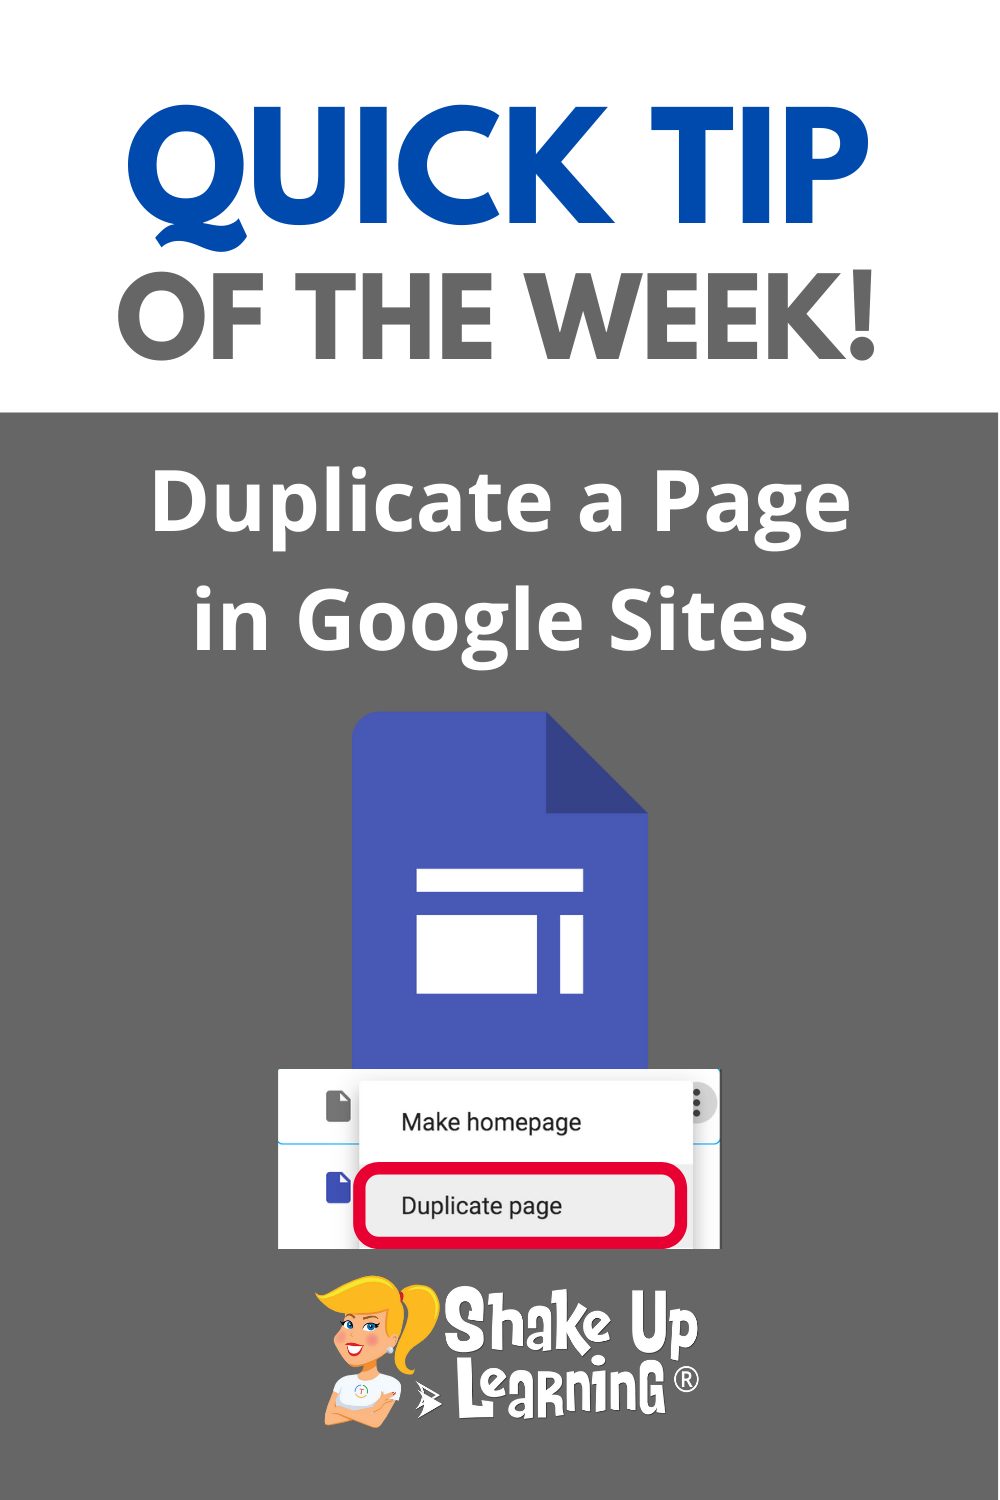 How to Duplicate a Page in Google Sites